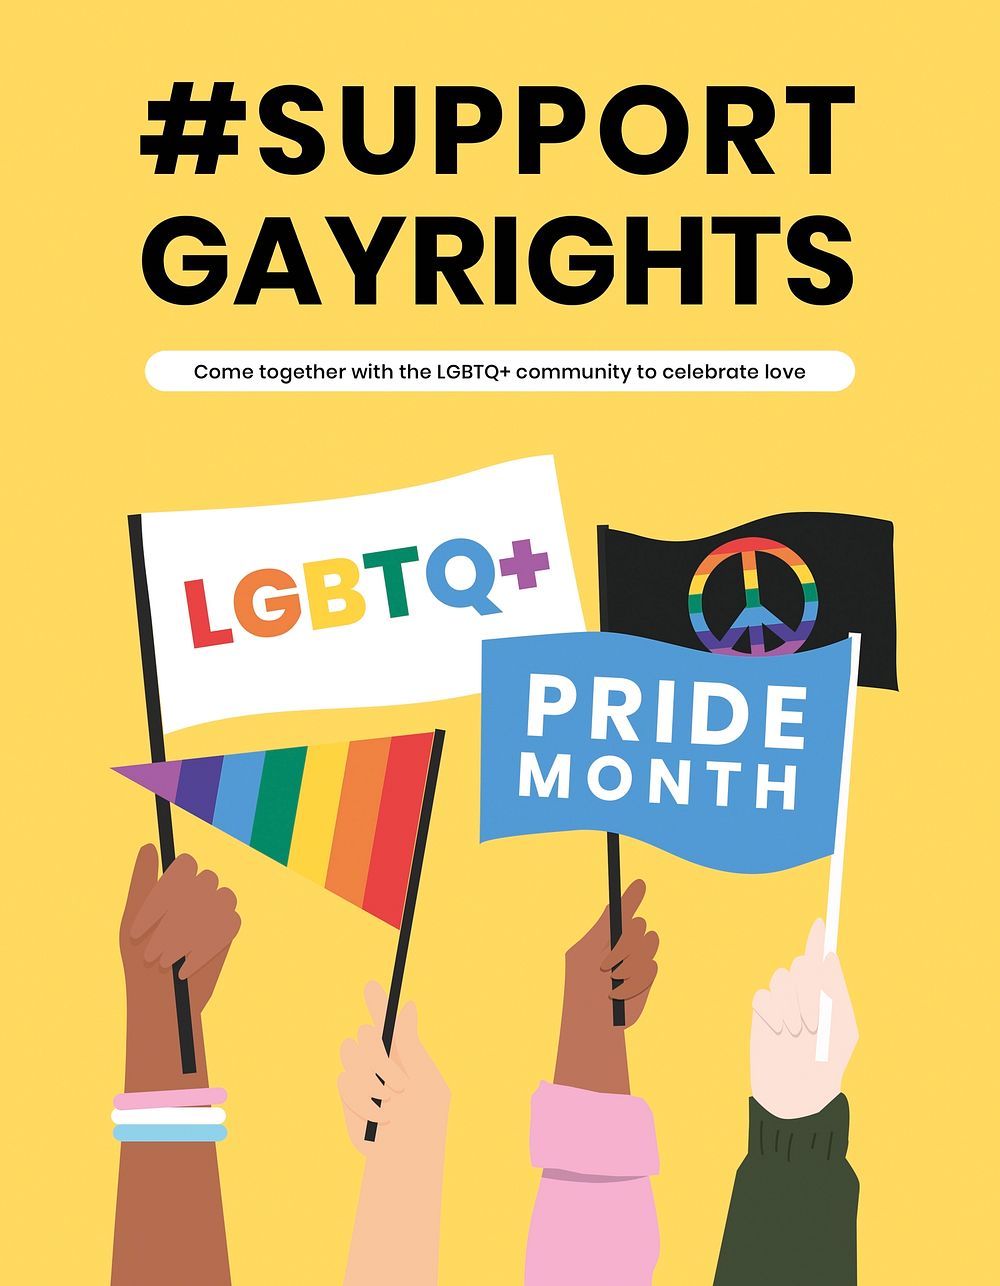 Support gay rights flyer template, LGBTQ, Pride Month campaign psd